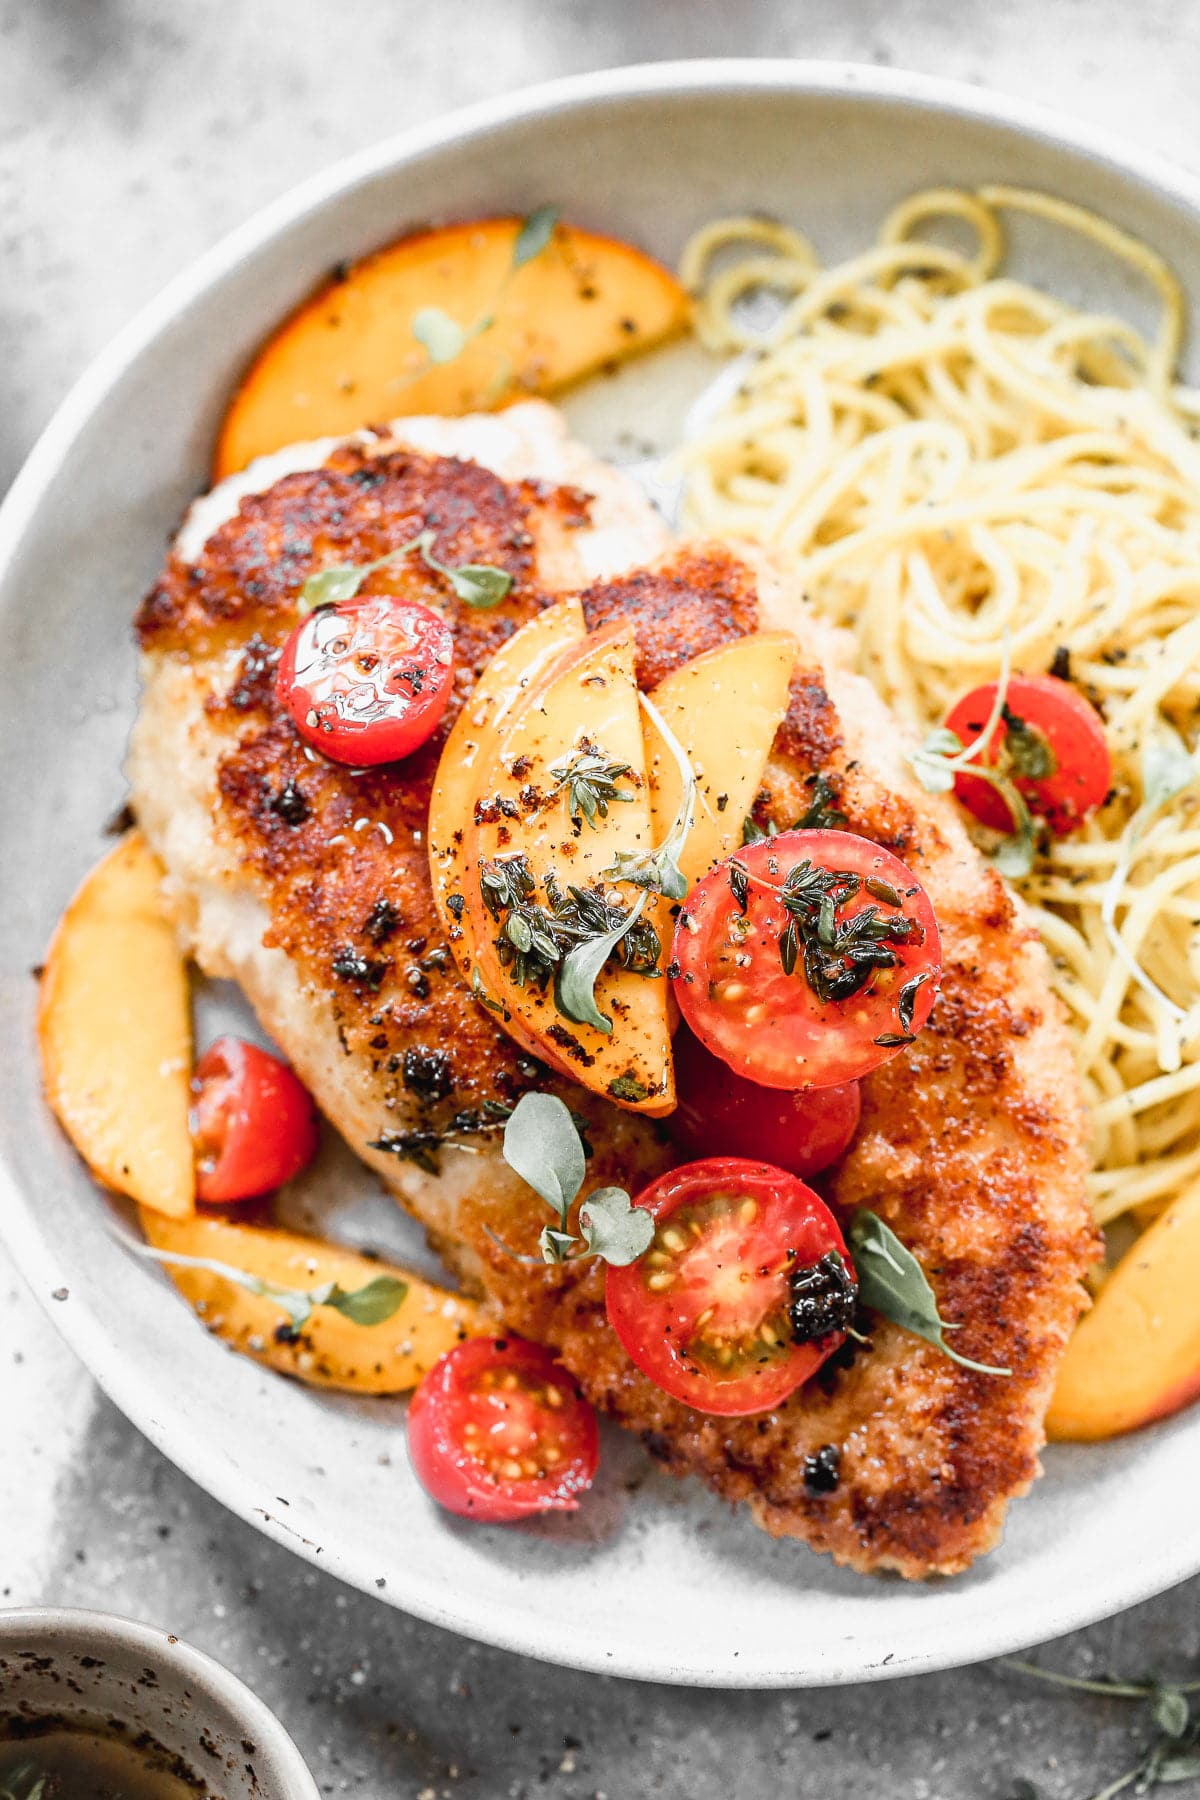 If summer were showcased on a plate it would surely be in the form of our Mozzarella-Stuffed Peach Chicken. This ultra crispy on the exterior, cheesy and tender on the interior winner of a chicken dish is adorned with the sweetest peaches and tomatoes and then drizzled with an intoxicating combination of brown butter, thyme, and lemon.&nbsp;You don't want to miss it!